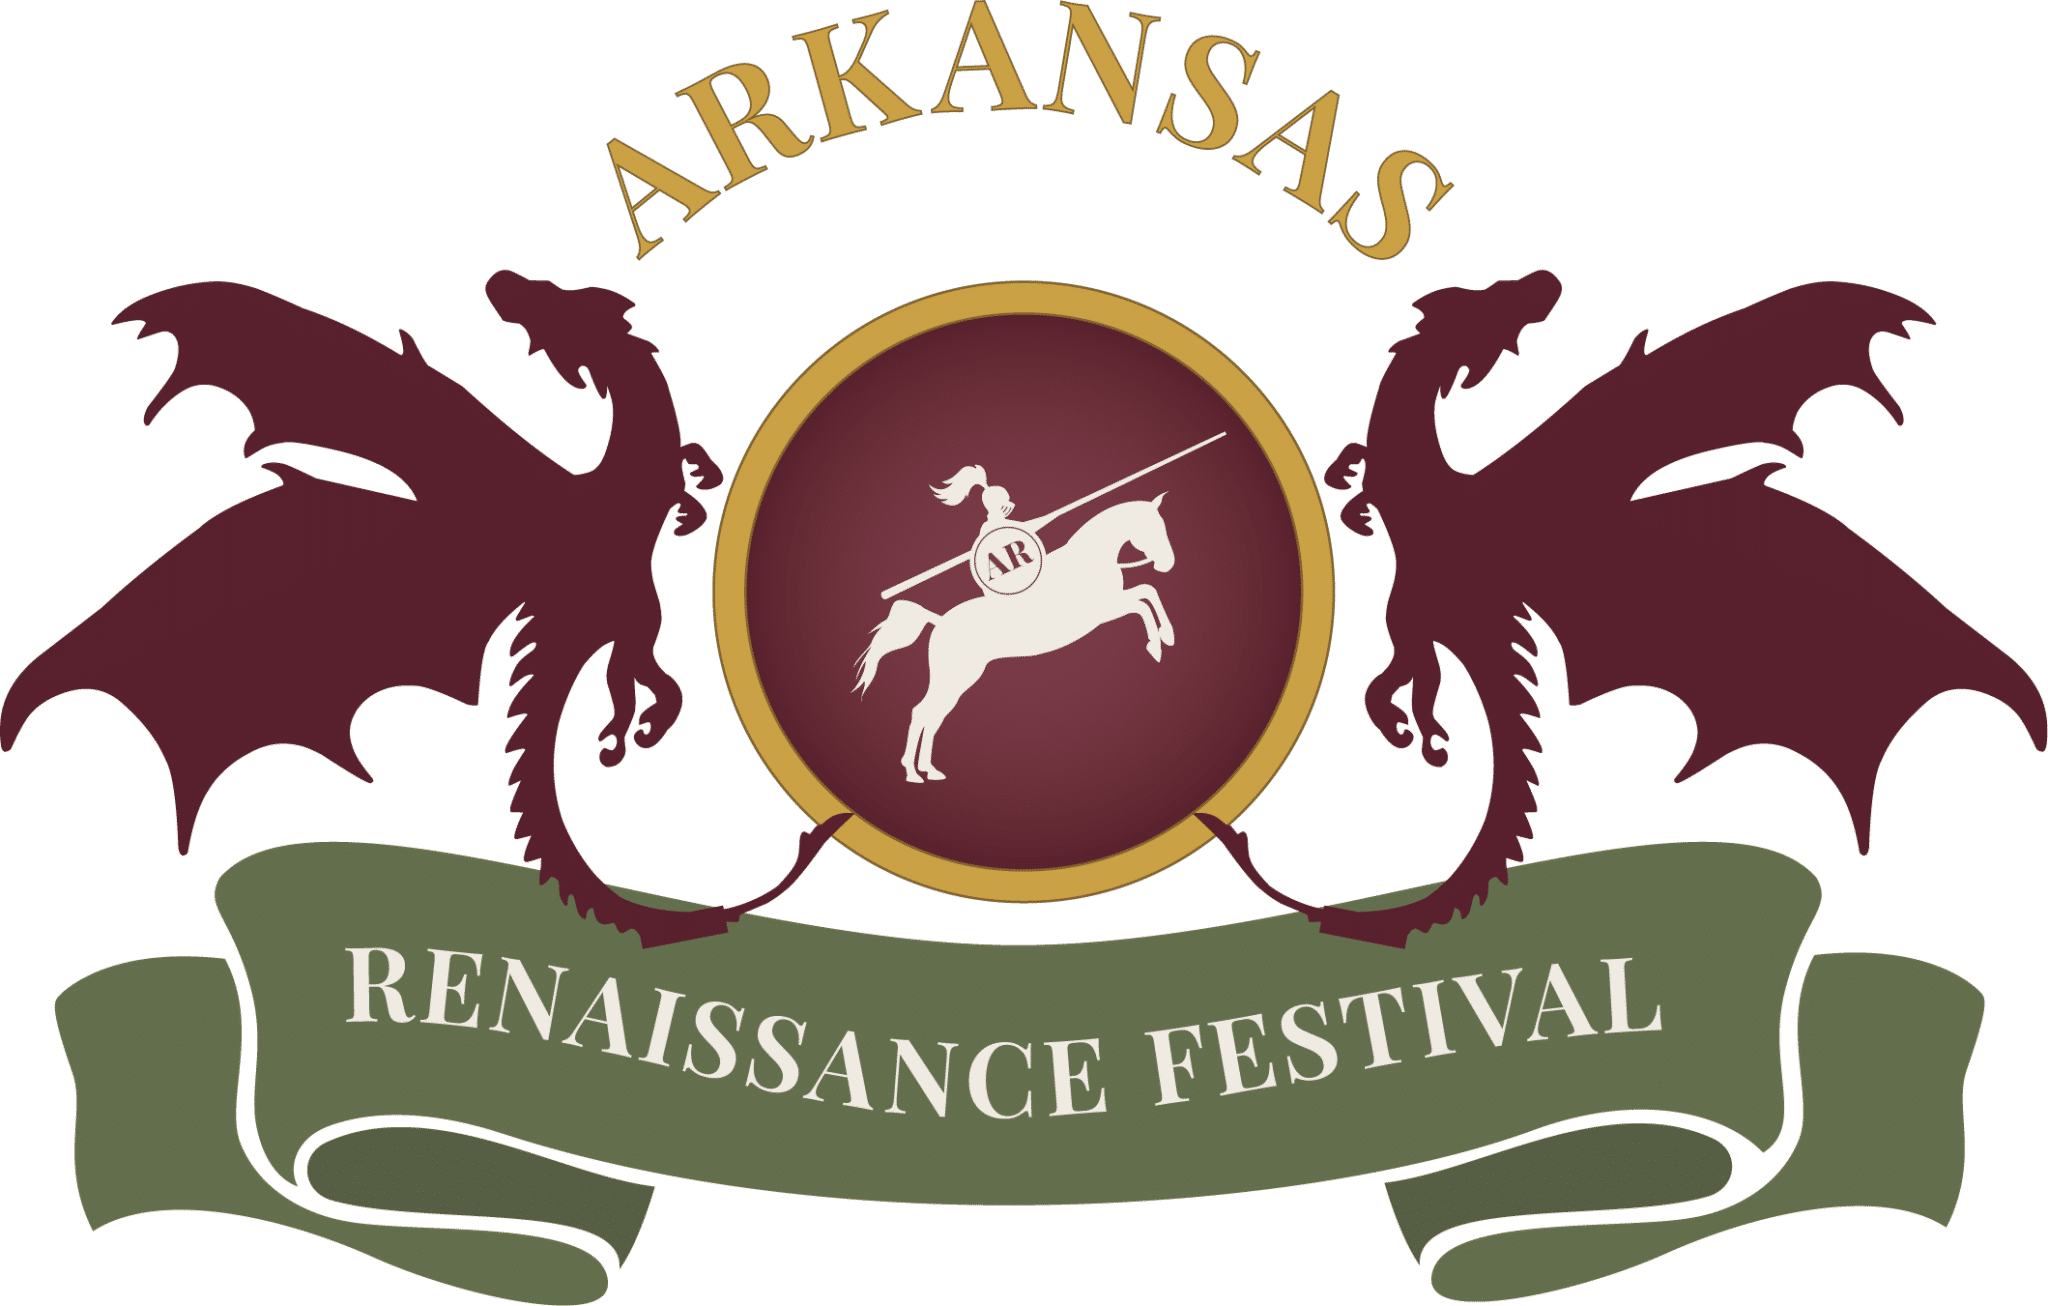 Arkansas Renaissance Logo that says, "Arkansas Renaissance Festival" with two dragons and a knight on a horse.